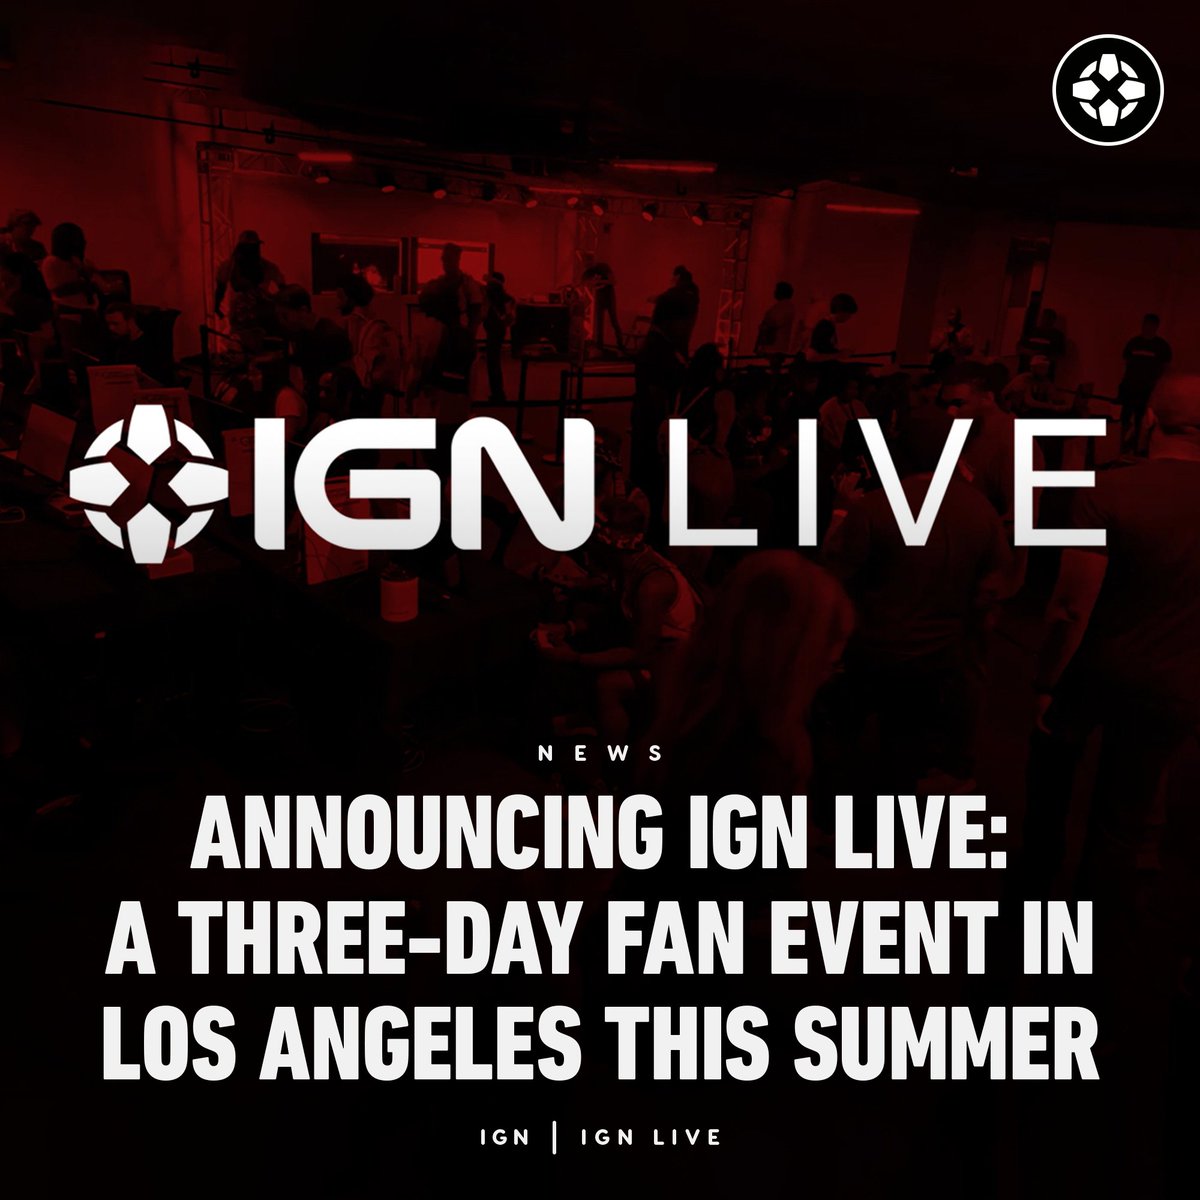 IGN will host IGN Live in early June: an in-person, three-day fan event in Los Angeles this summer featuring gaming and entertainment creators, developers, publishers, and enthusiasts. bit.ly/3SBzL3k